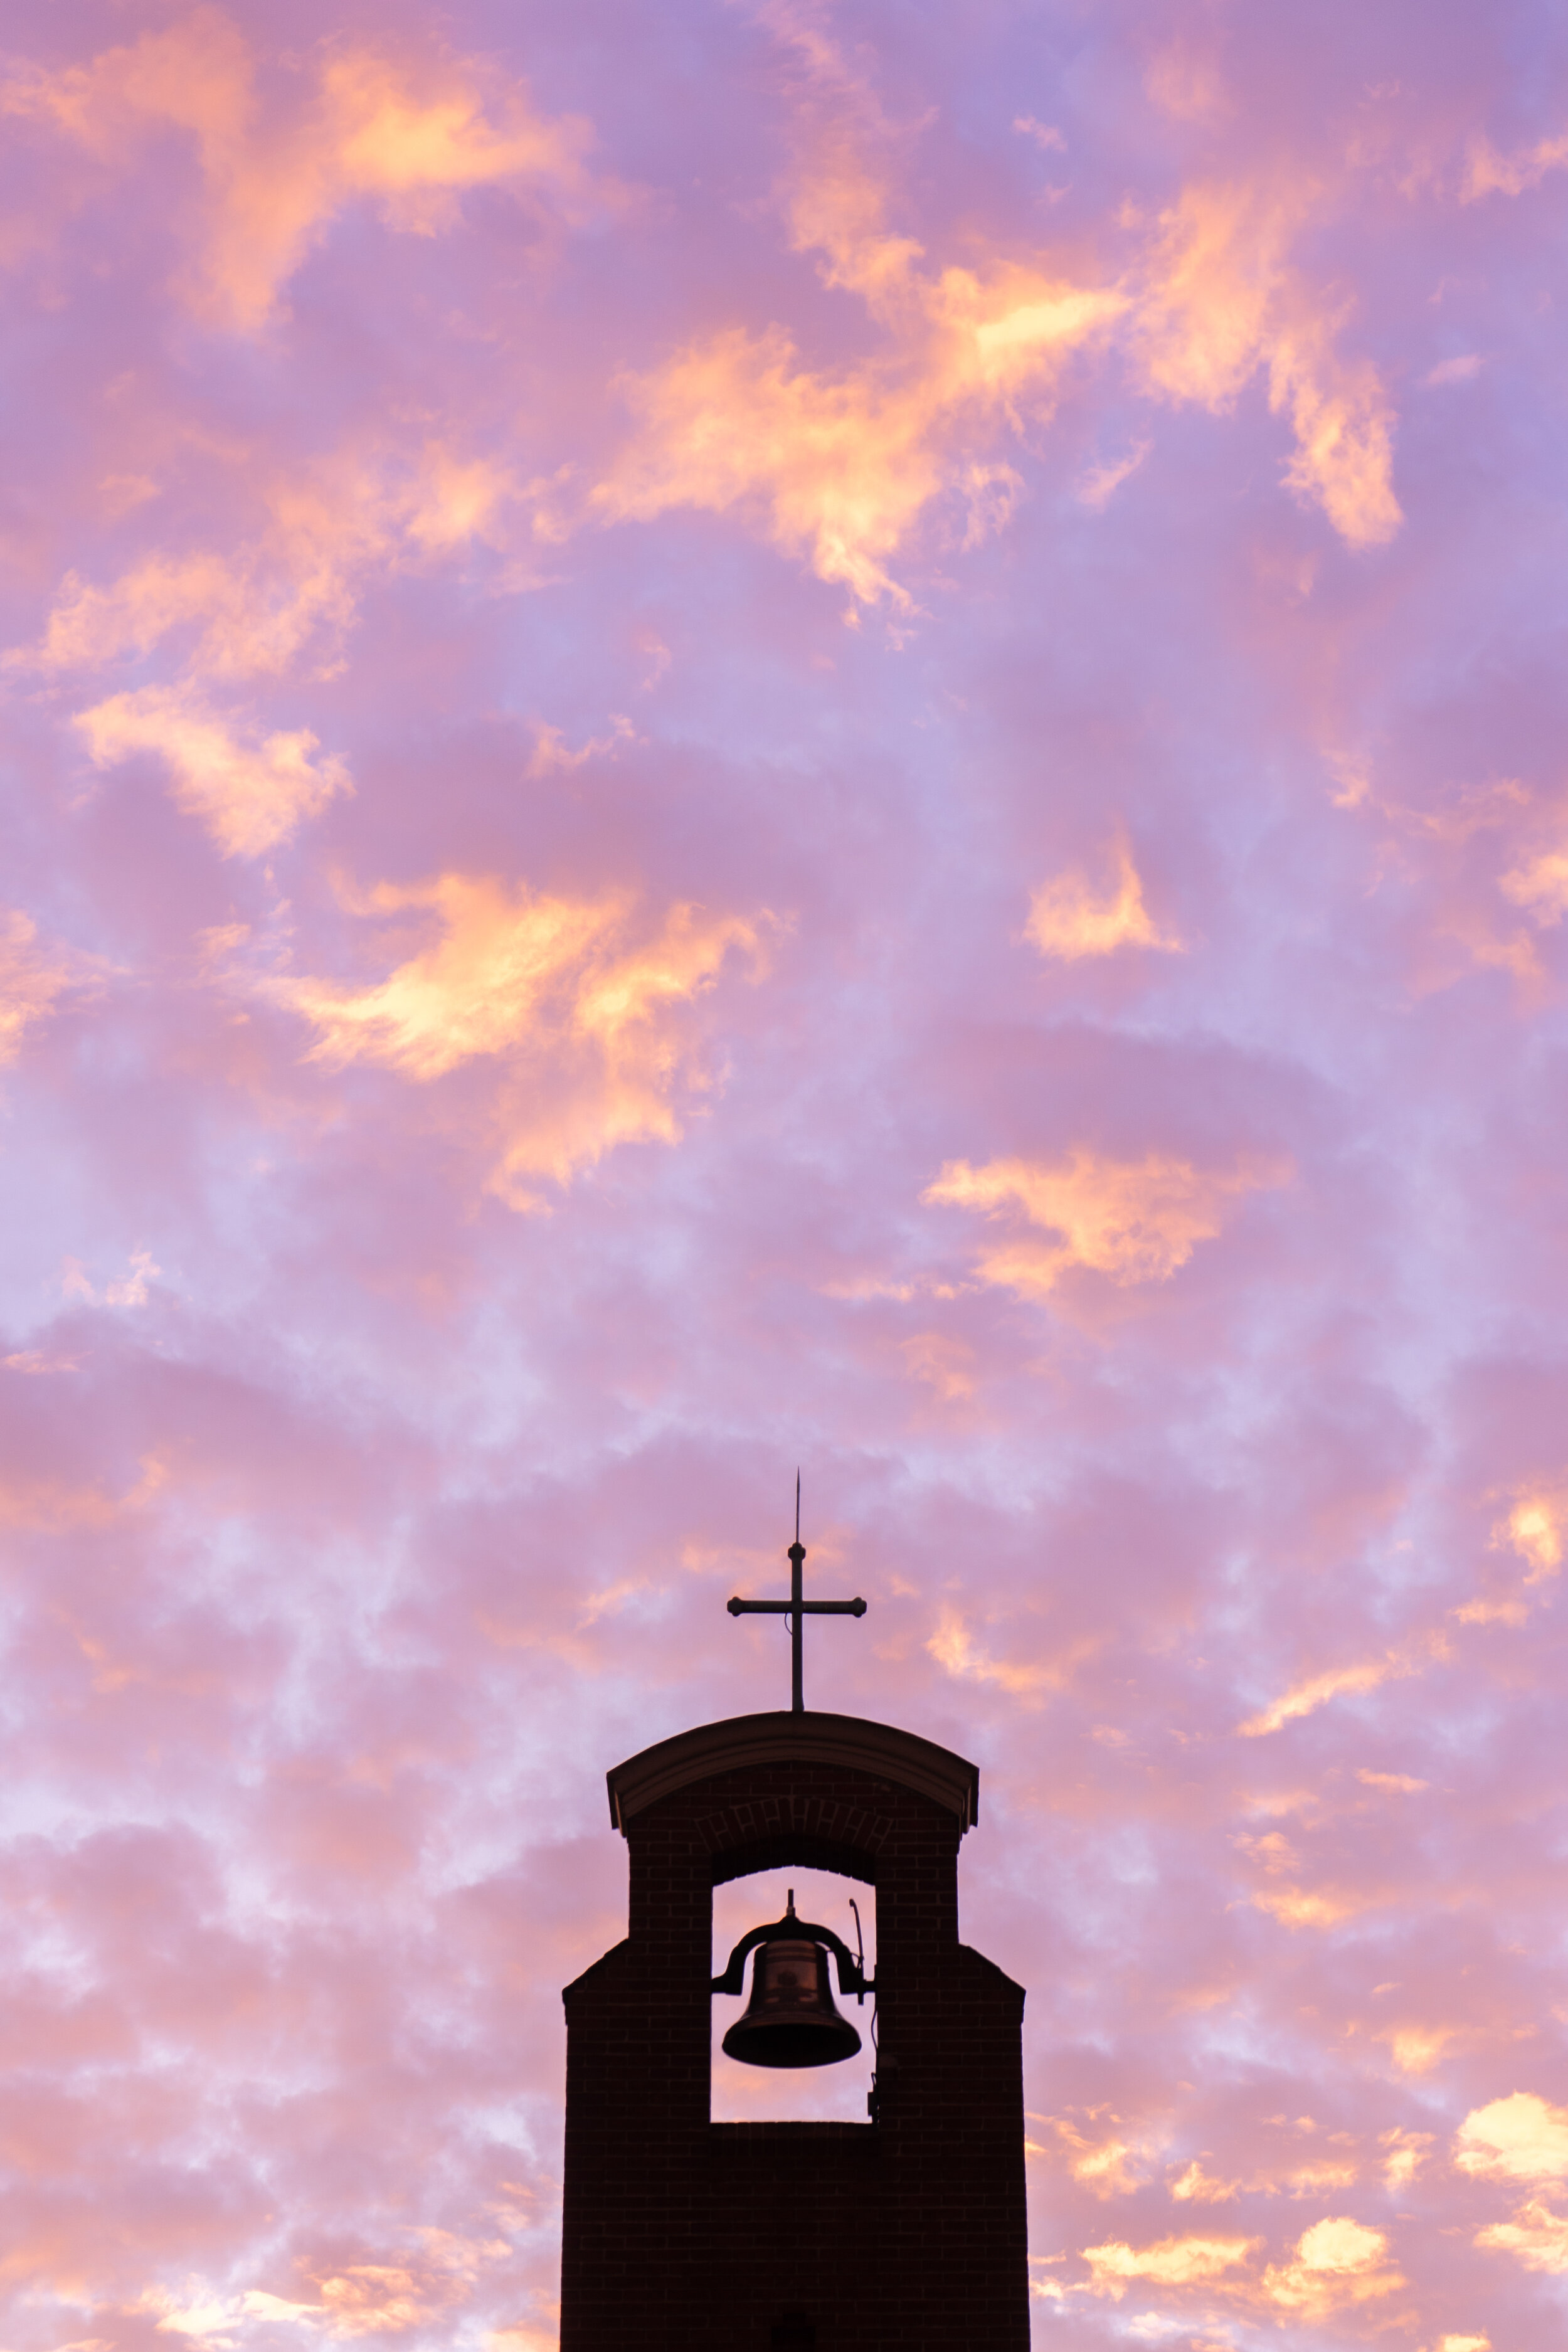 Sunset over St. Athanasius Church in Curtis Bay, Maryland